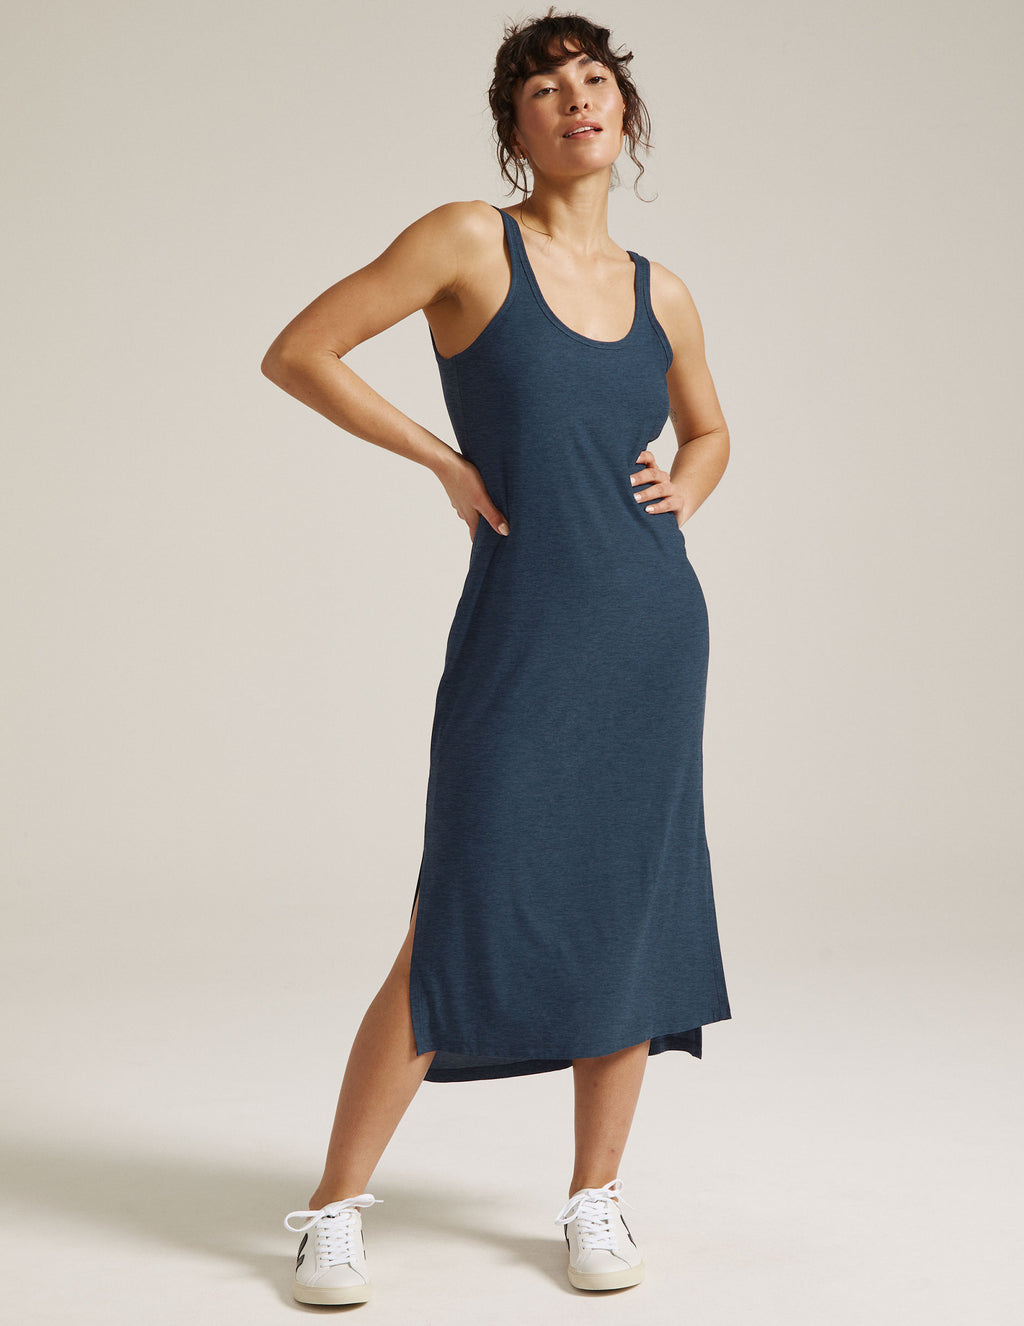 Featherweight Resort Dress Featured Image